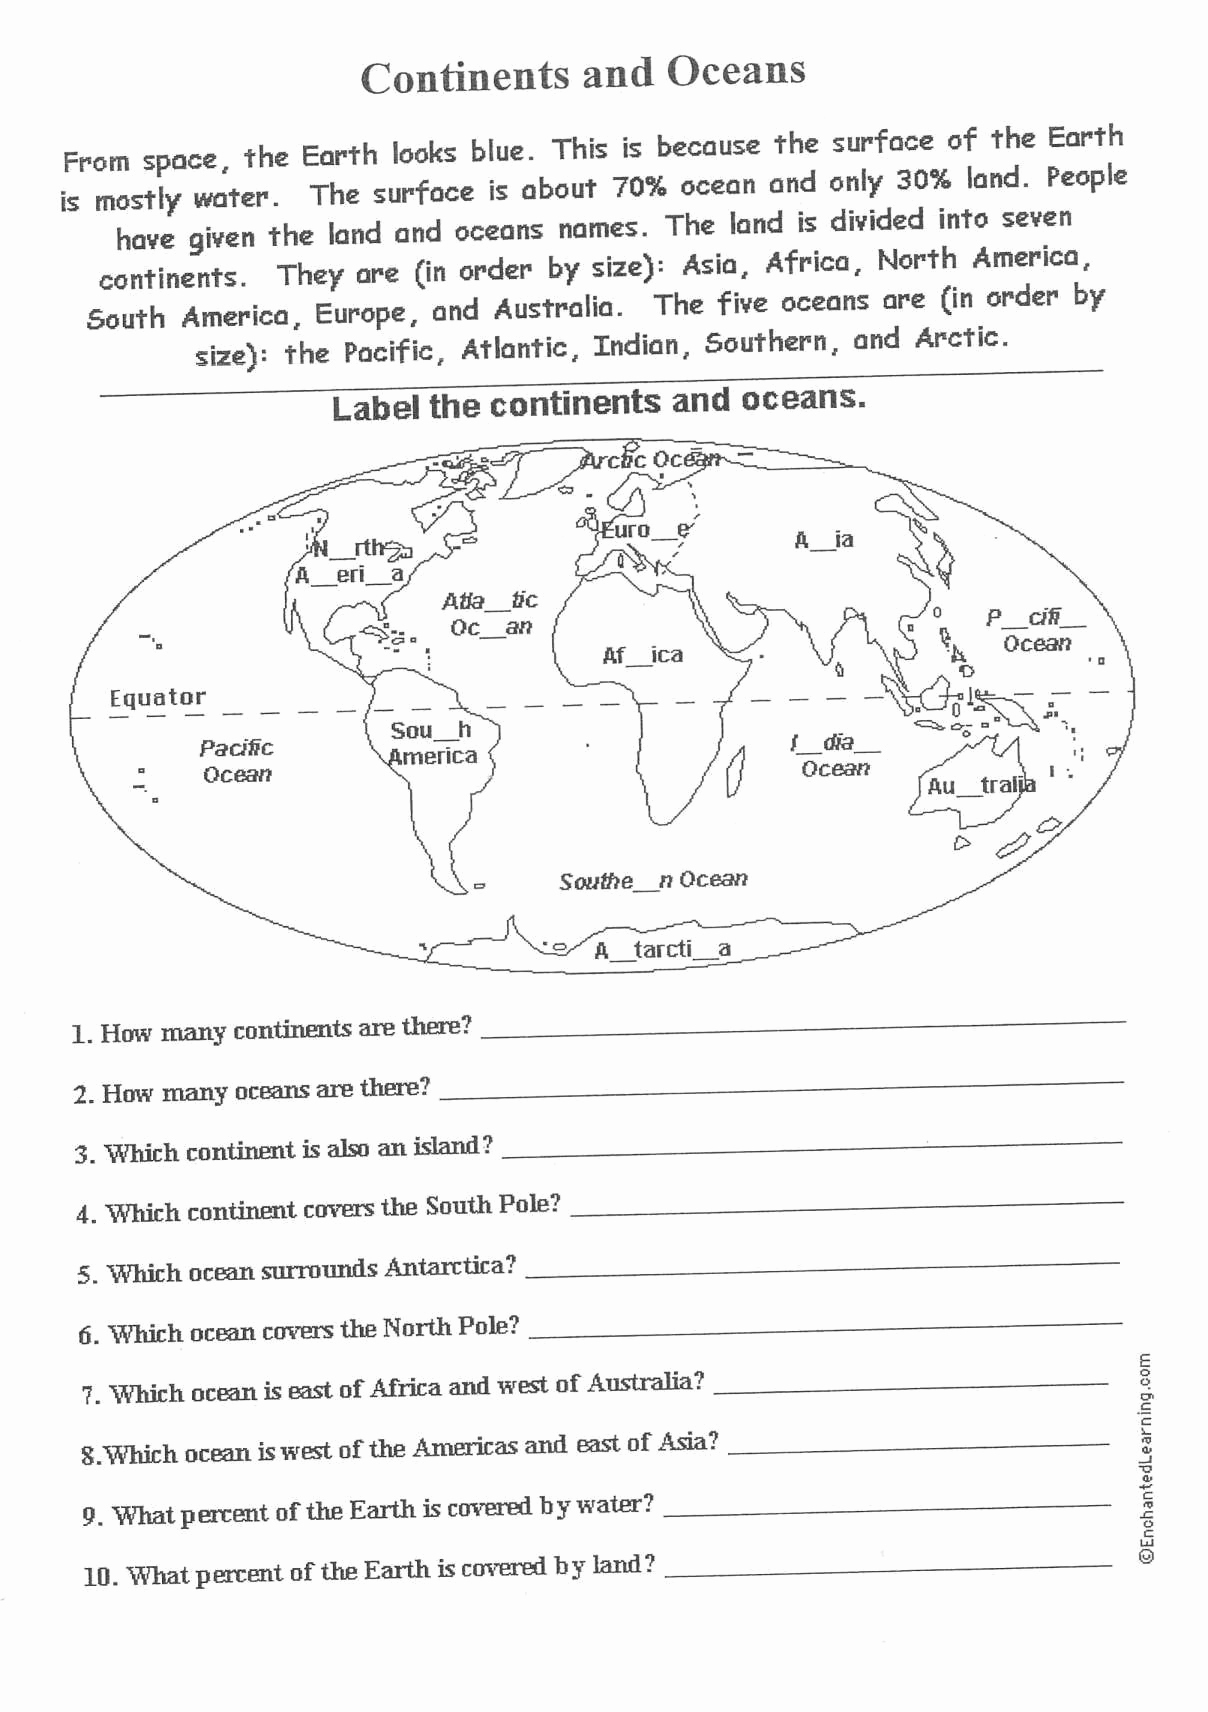 5th Grade Geography Worksheets Awesome 8 5th Grade World Geography Worksheets Grade In 2020